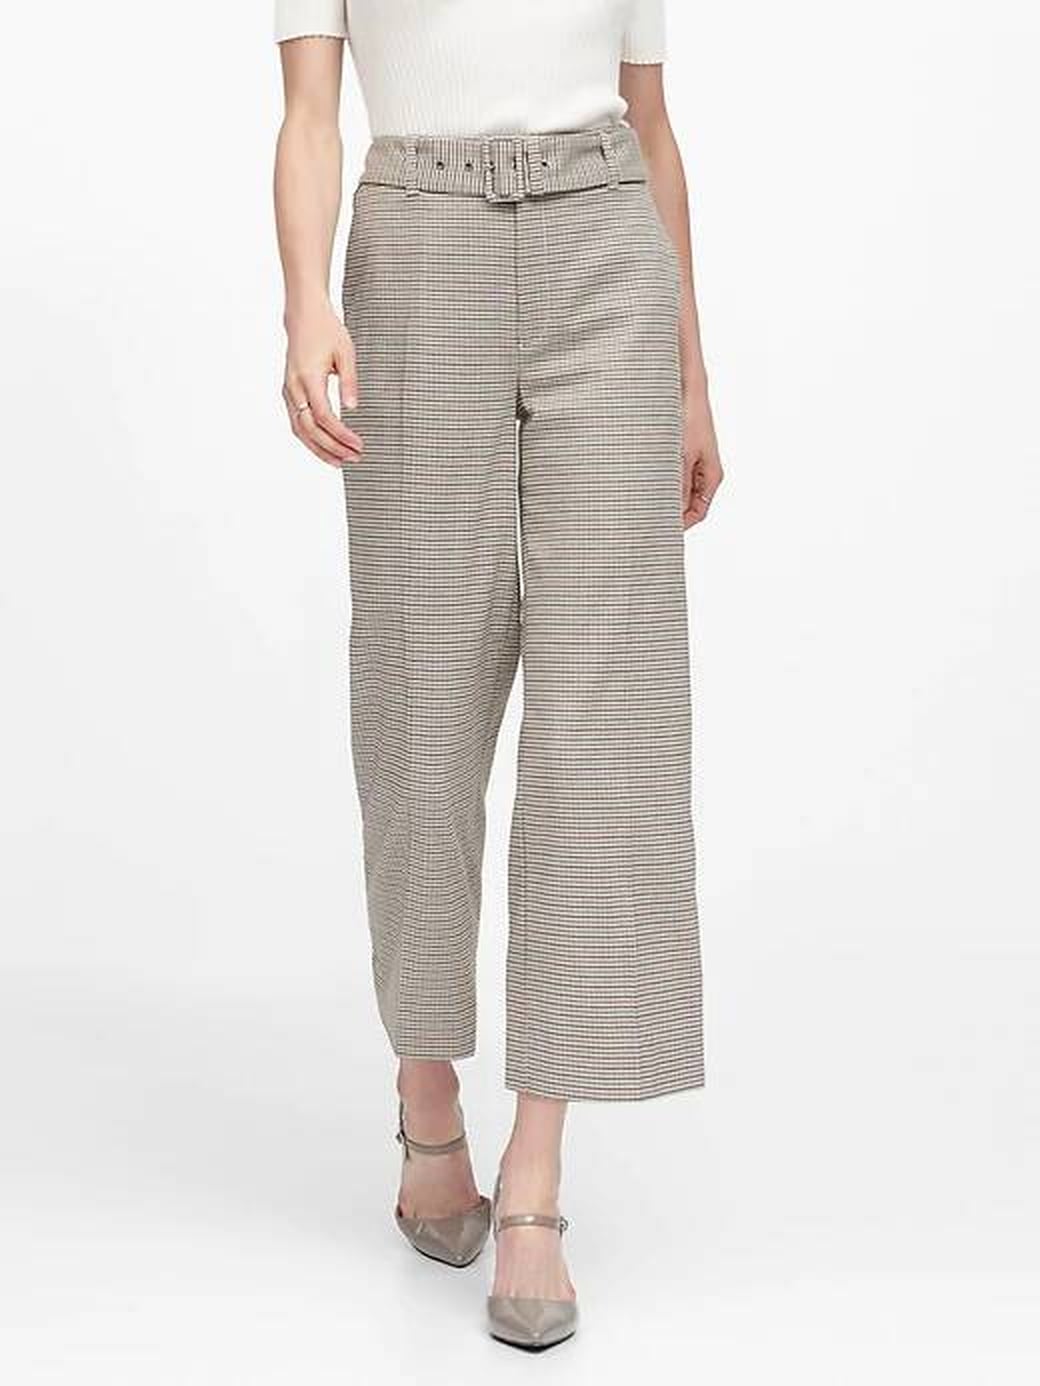 Best Products From Banana Republic Under $100 | POPSUGAR Fashion